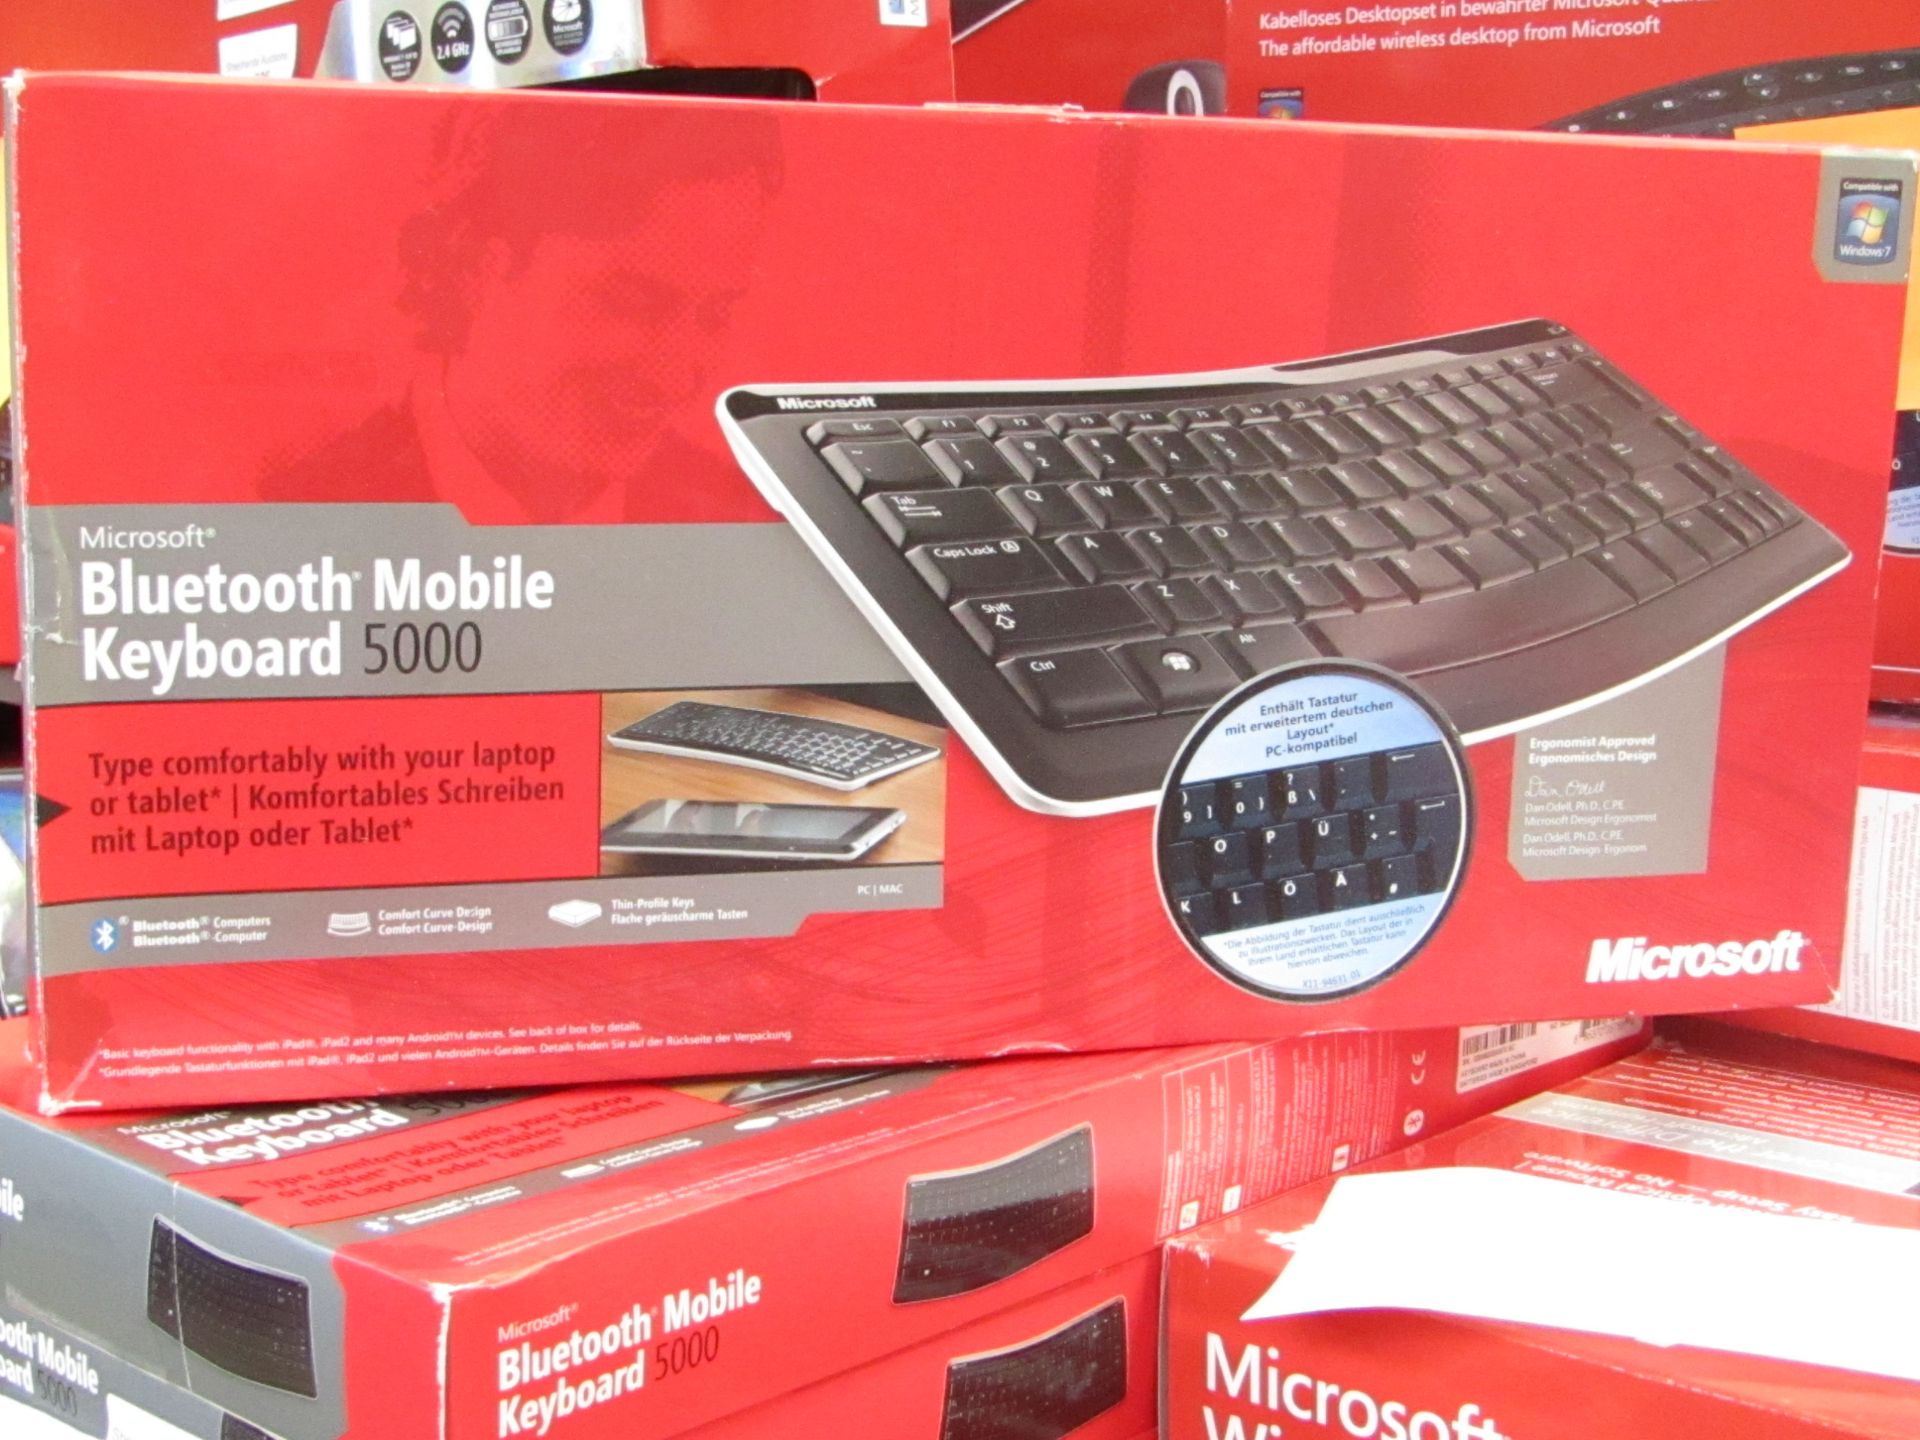 Microsoft Bluetooth mobile keyboard 5000, unused and boxed.